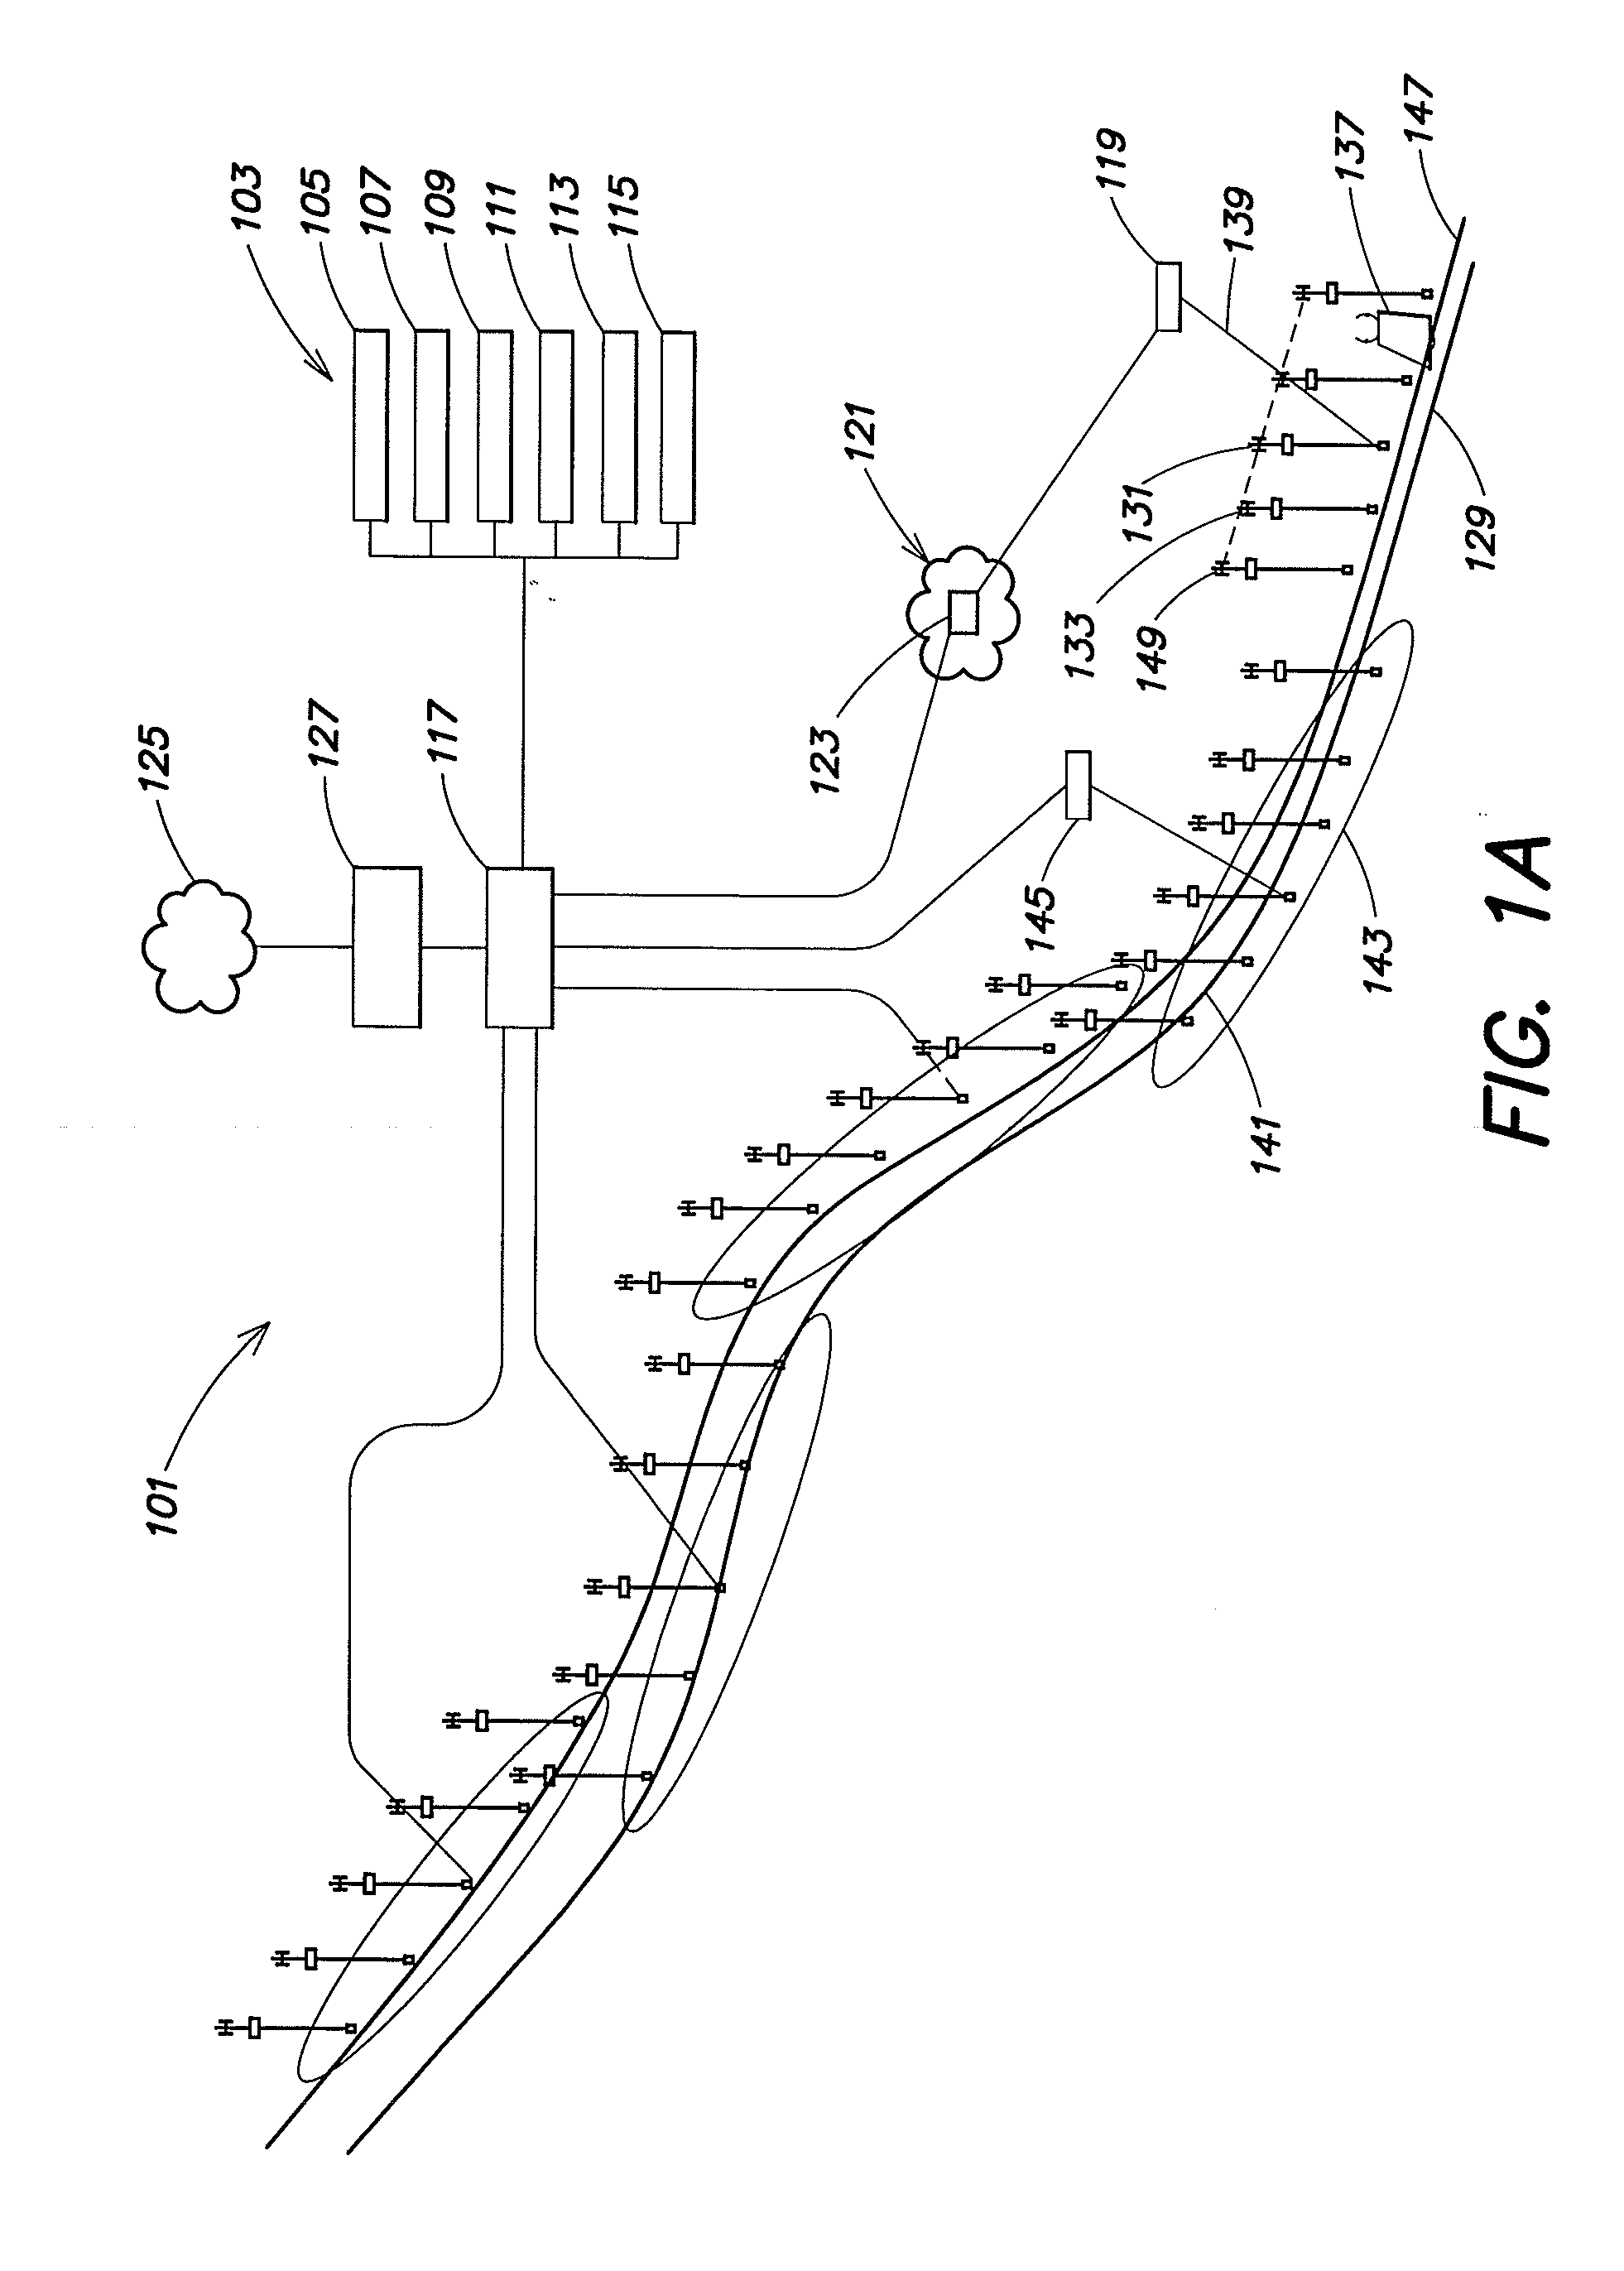 System and method of authenticating mobile devices